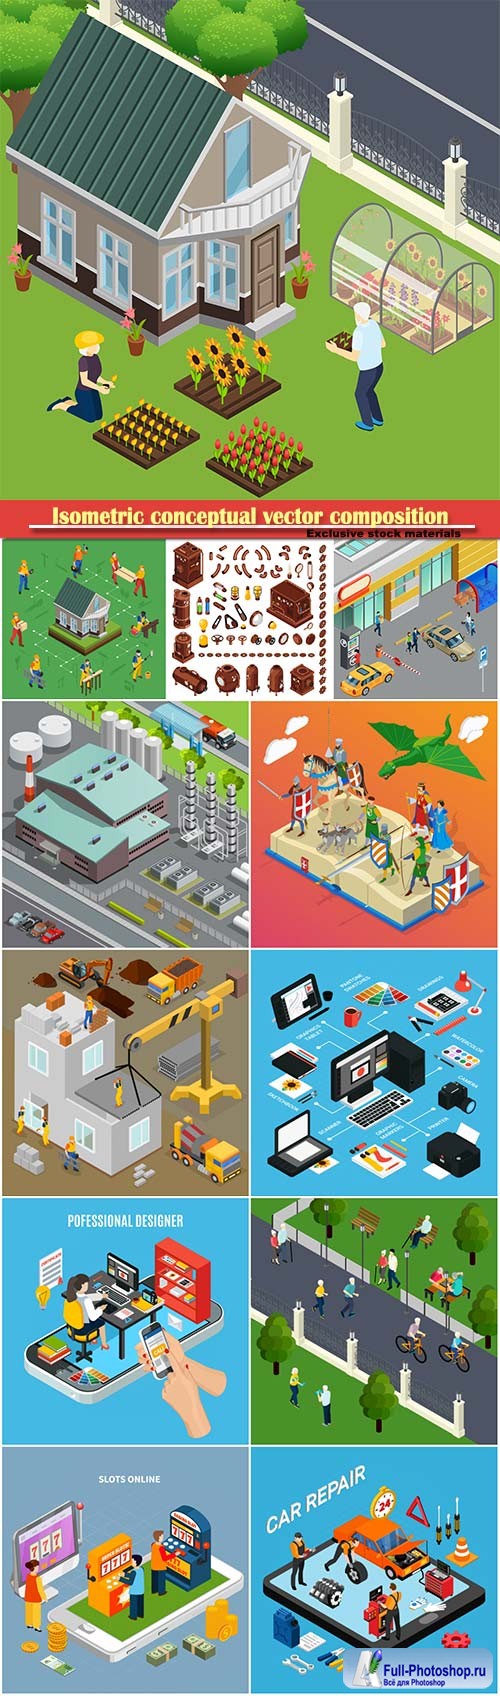 Isometric conceptual vector composition, infographics template # 39